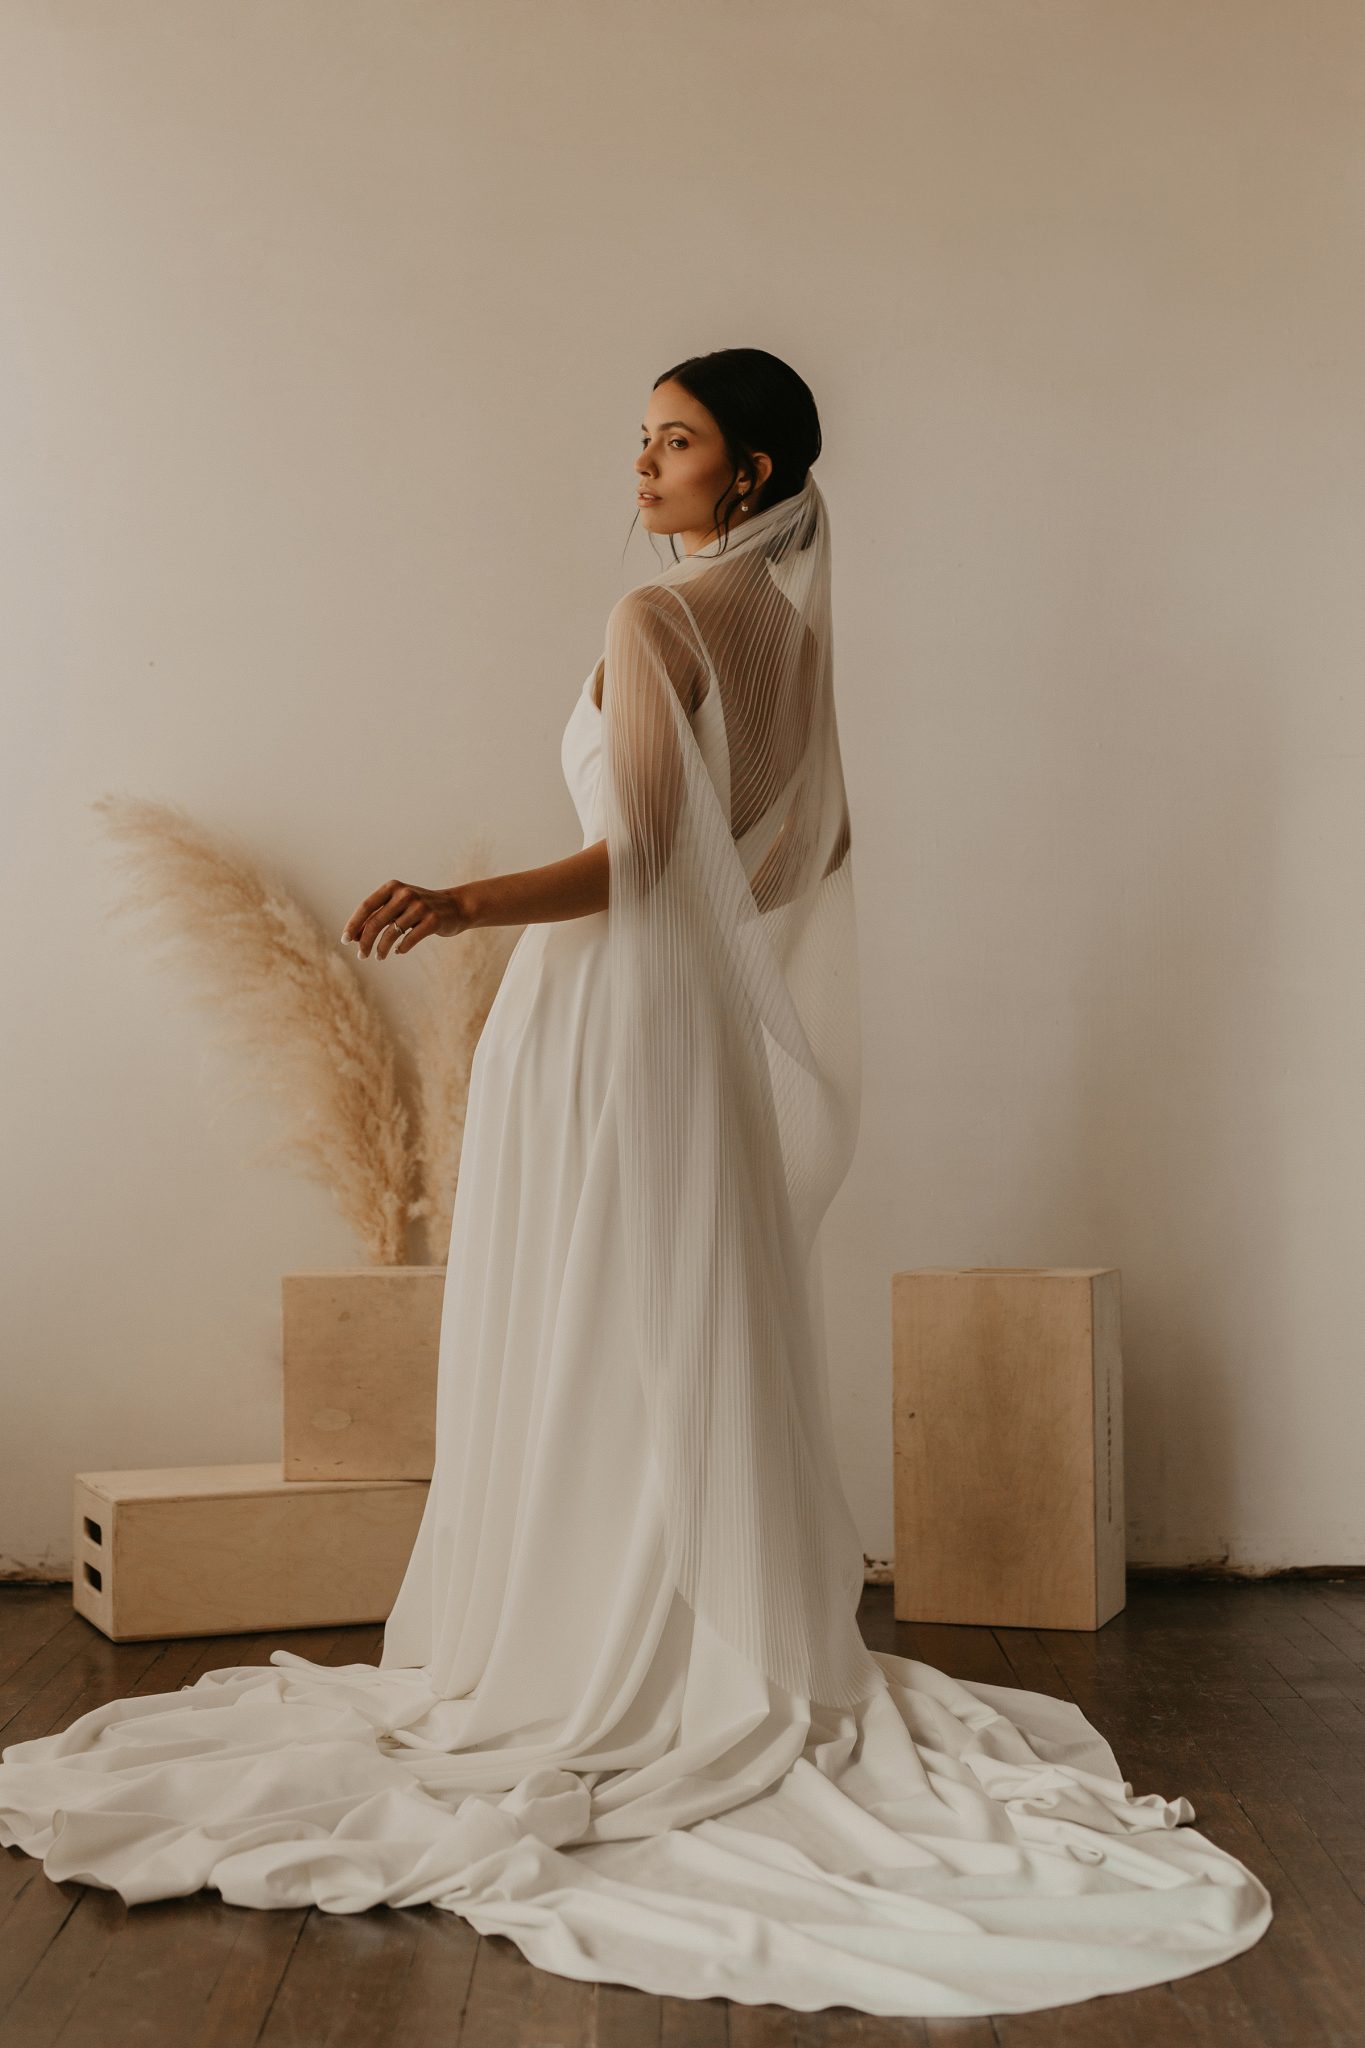 Bridal Minimalism Feature on Bronte Bride: Delica Bridal Shares All About New Bridal Trends & Dress Shopping During Covid, wedding dress shopping, boho bridal, bridal veil